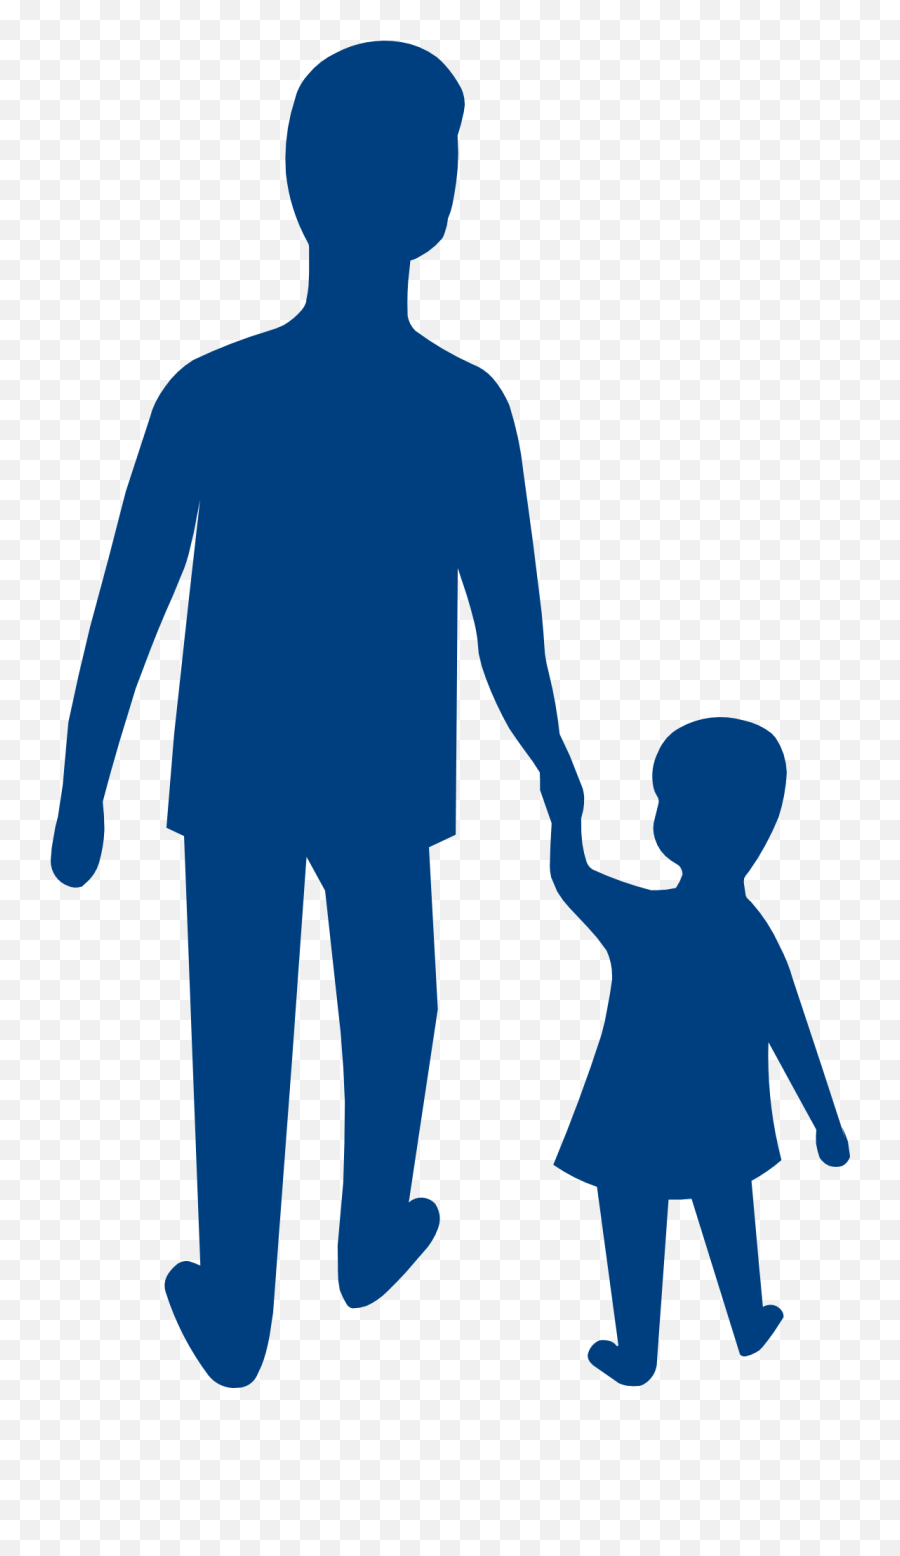 Blue Silhouettes Of Father And Daughter On White Background - Niño Y Padre Png Emoji,Emotions Silhouette Children